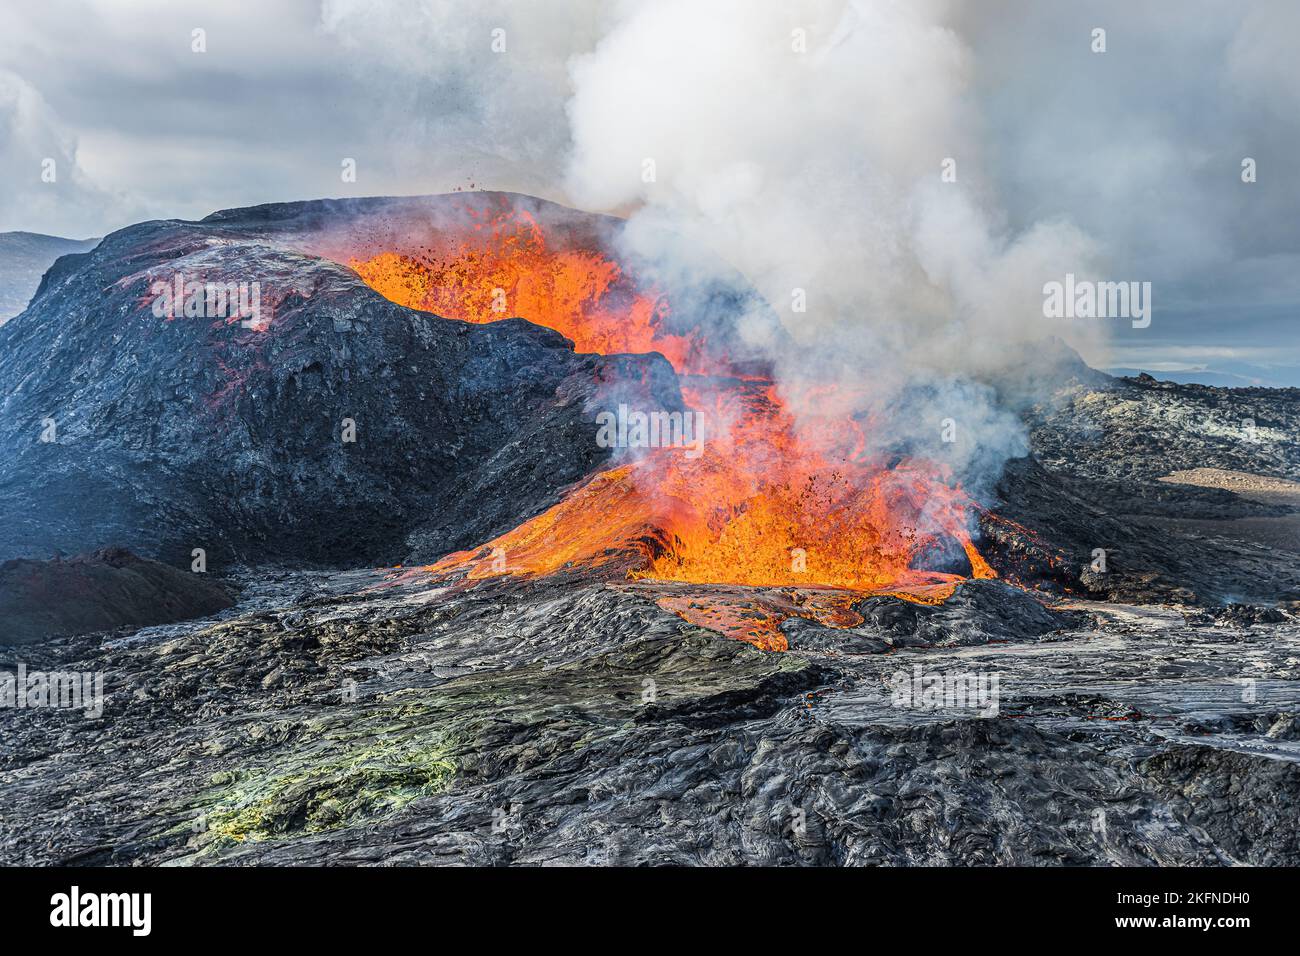 leveling off eruption from a volcanic crater. active volcano in the landscape in Geopark of Reykjanes Peninsula. glowing hot lava flows from volcano Stock Photo